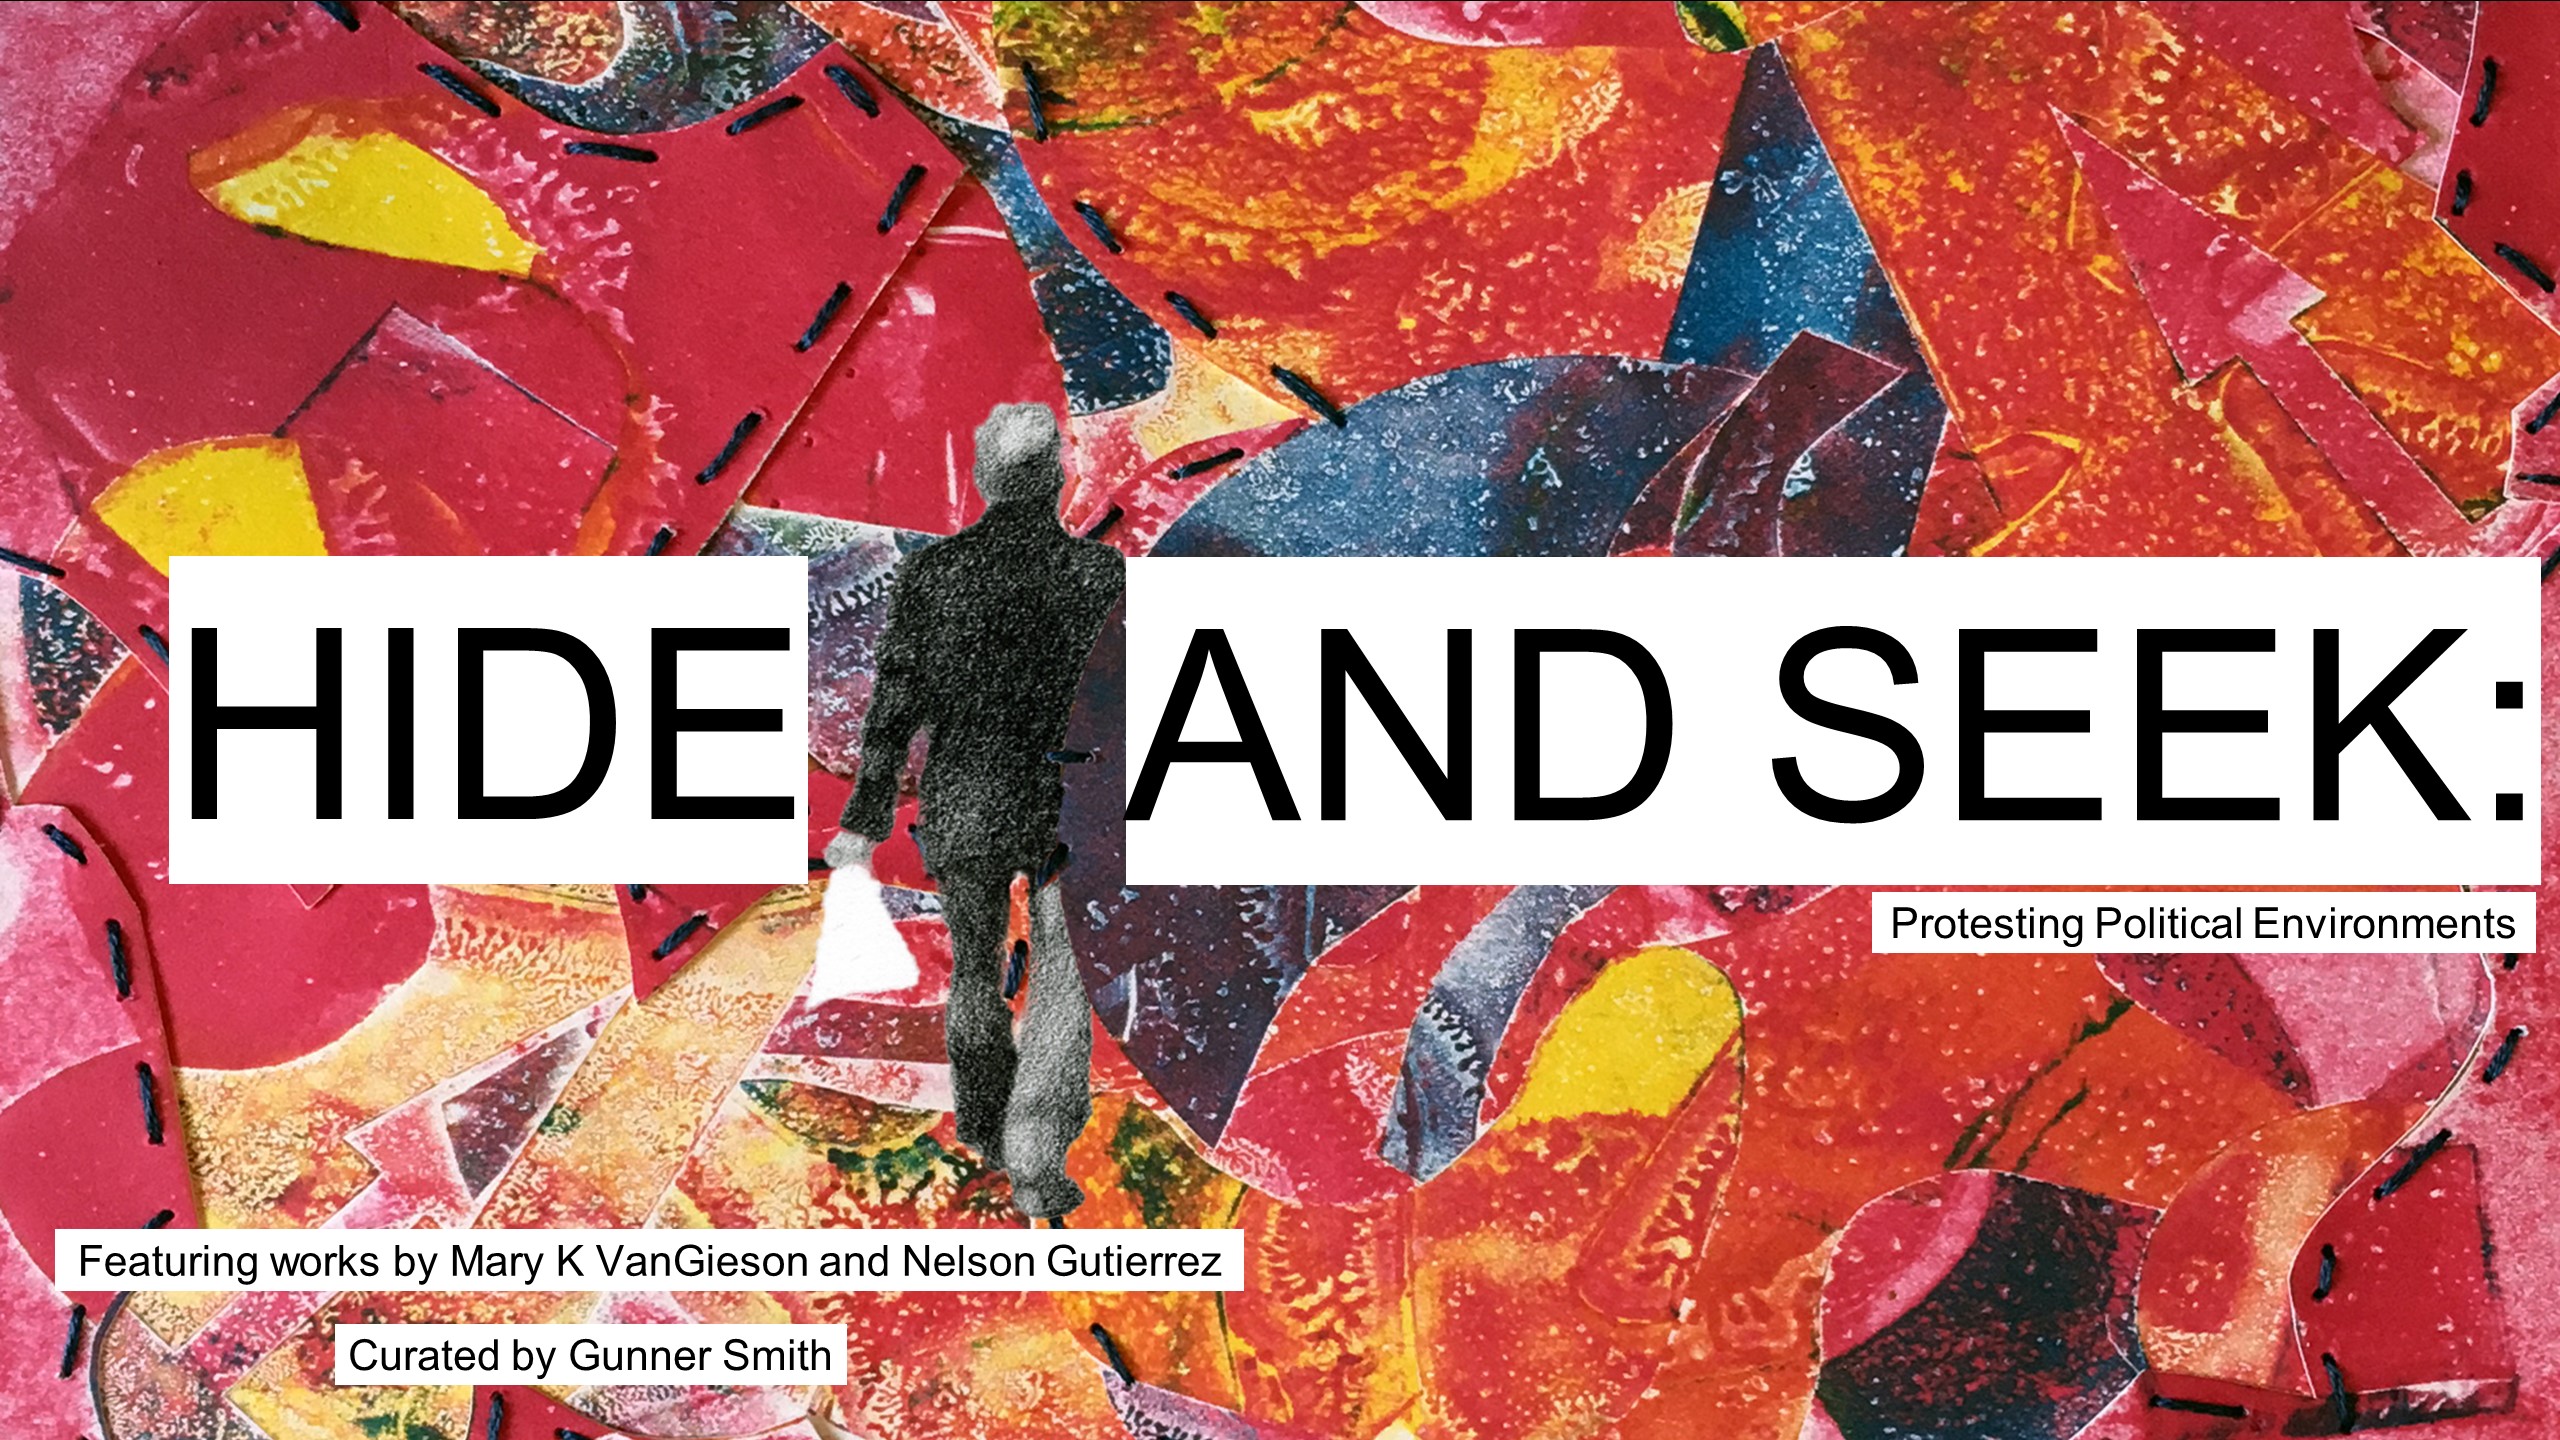 poster for Hide and Seek exhibit